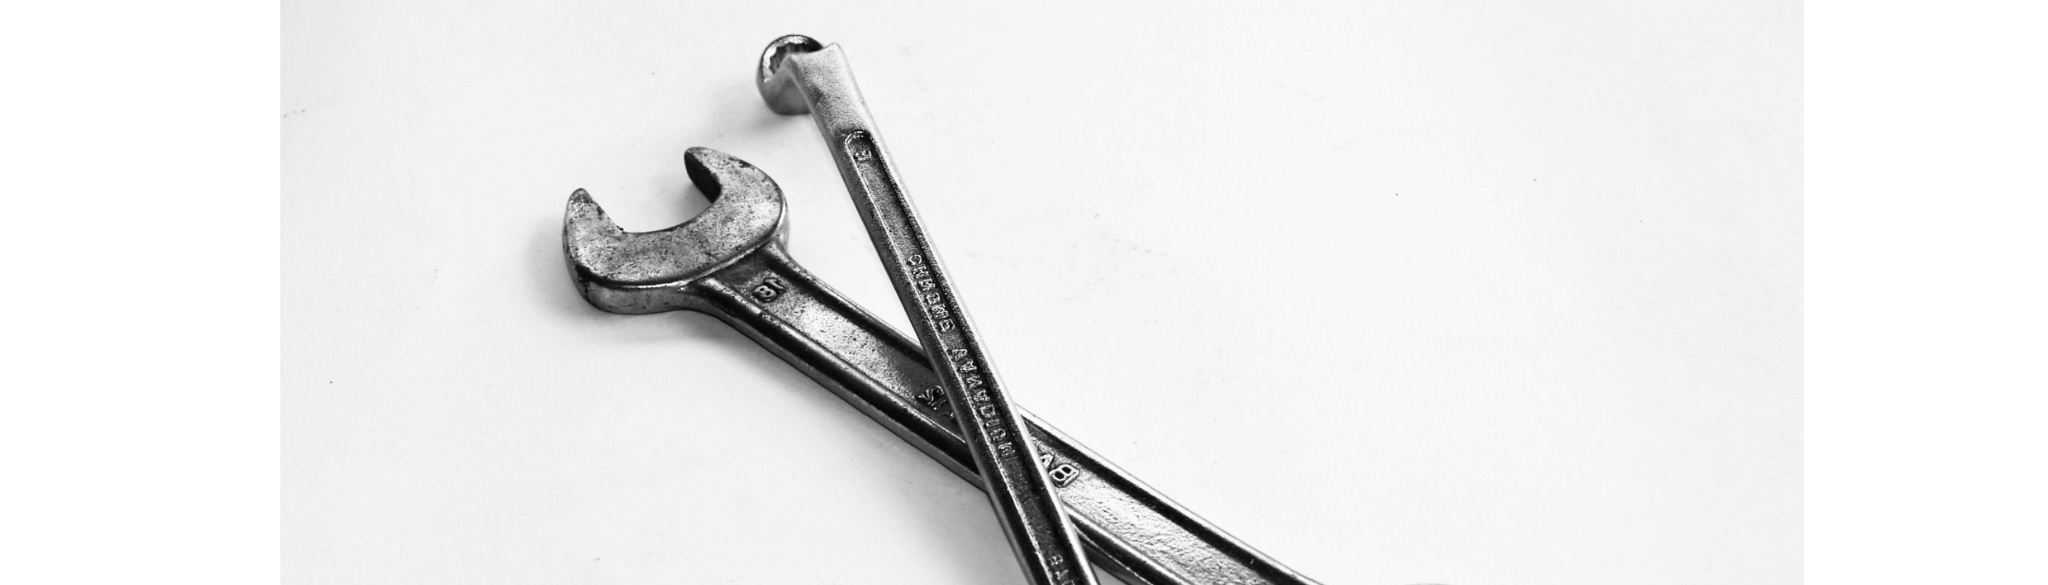 Spanners placed on a white background